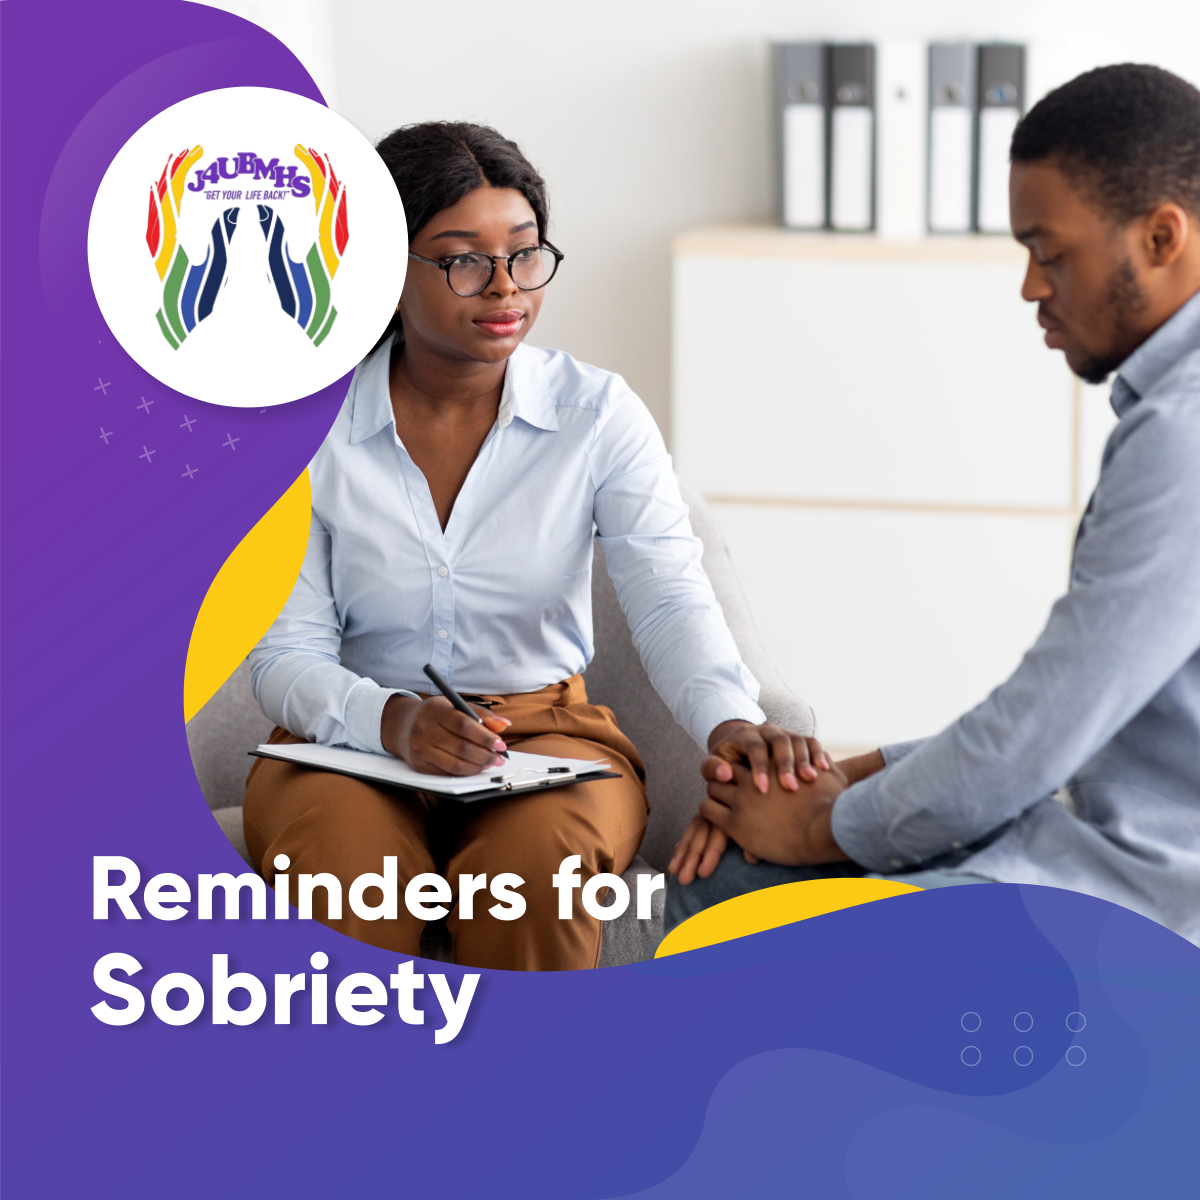 Reminders for Sobriety

For those who have been working on staying sober, you have our admiration and praise. Here are some reminders for your journey:

Read more: facebook.com/permalink.php?…

#PsychiatricClinic #Just4UBehavioralAndMentalHealthServices